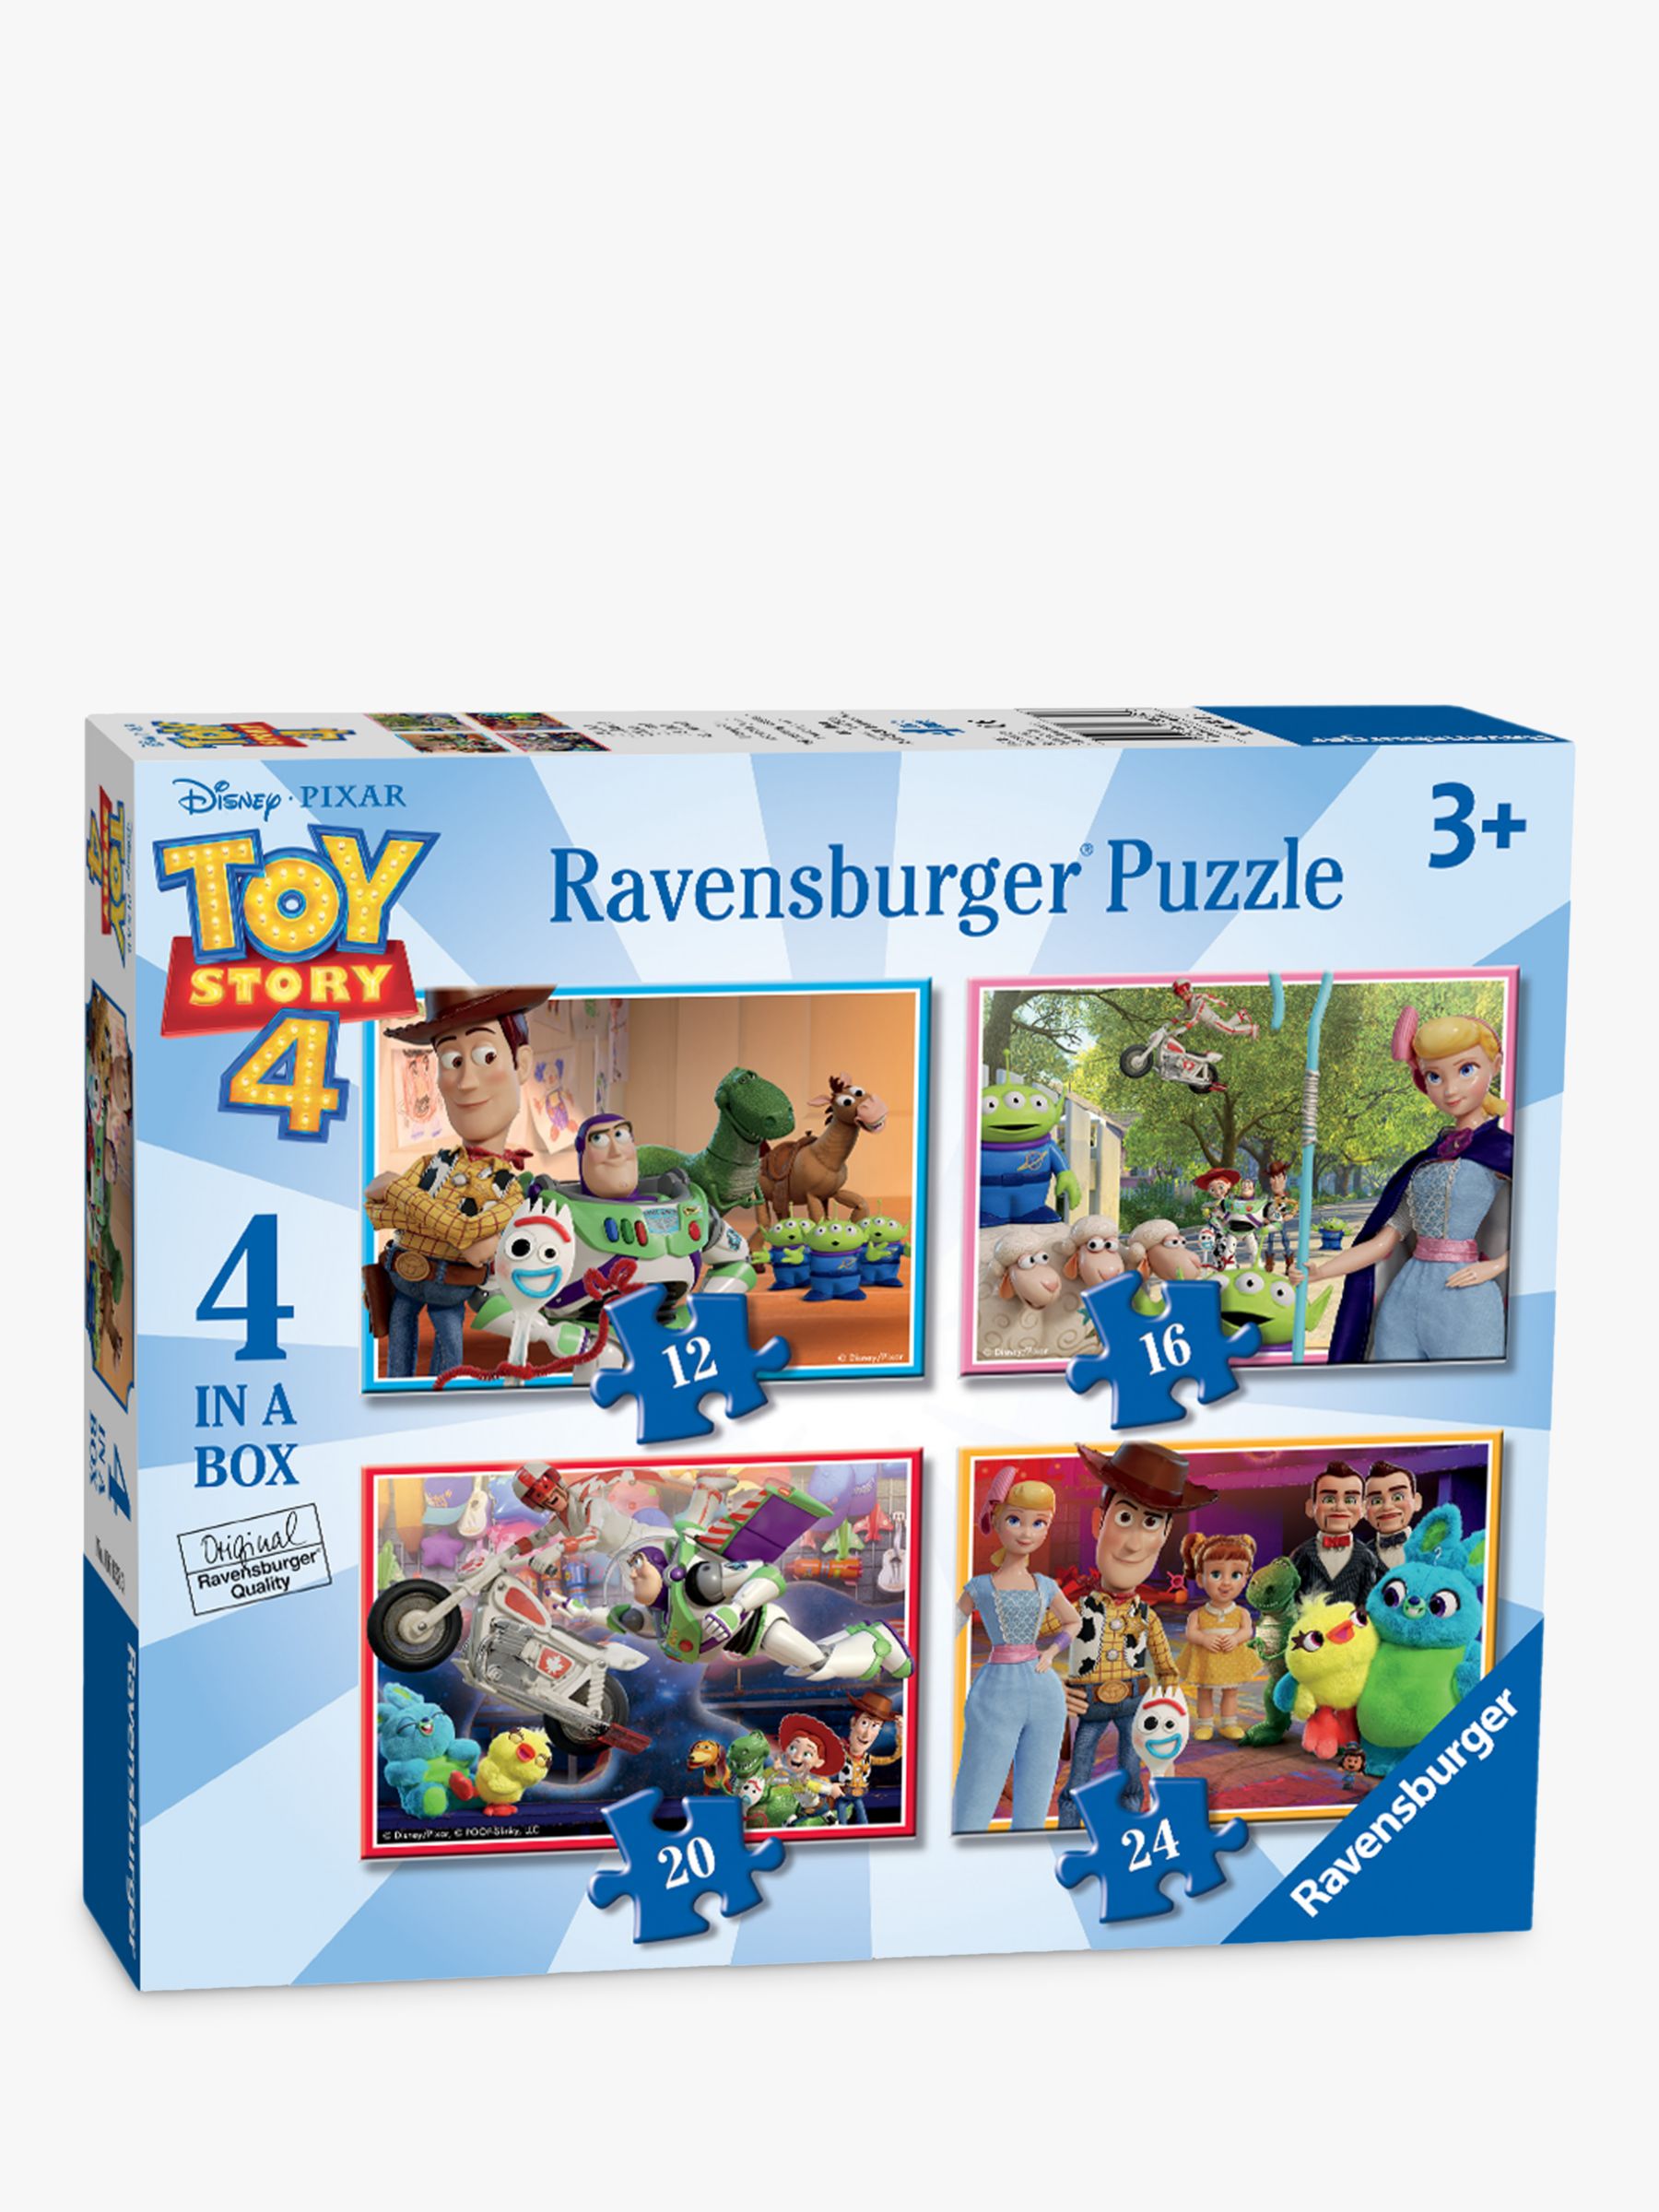 Ravensburger Toy Story 4 4 in a Box Jigsaw Puzzle